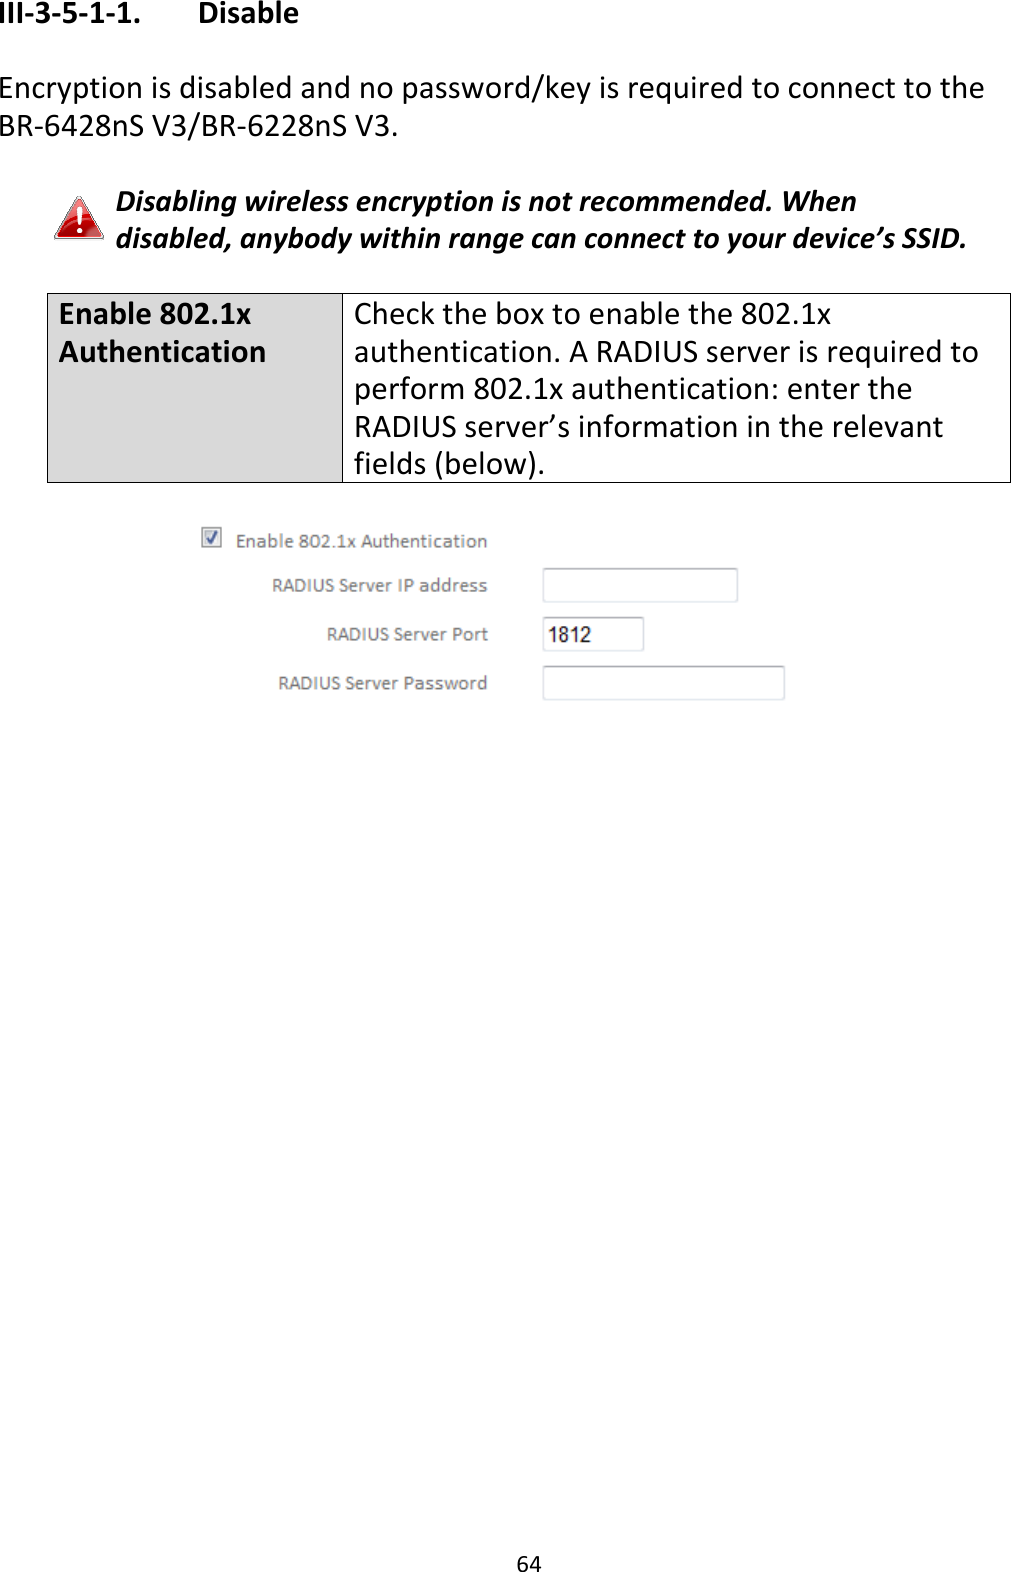 64 III-3-5-1-1.    Disable  Encryption is disabled and no password/key is required to connect to the BR-6428nS V3/BR-6228nS V3.  Disabling wireless encryption is not recommended. When disabled, anybody within range can connect to your device’s SSID.  Enable 802.1x Authentication Check the box to enable the 802.1x authentication. A RADIUS server is required to perform 802.1x authentication: enter the RADIUS server’s information in the relevant fields (below).   